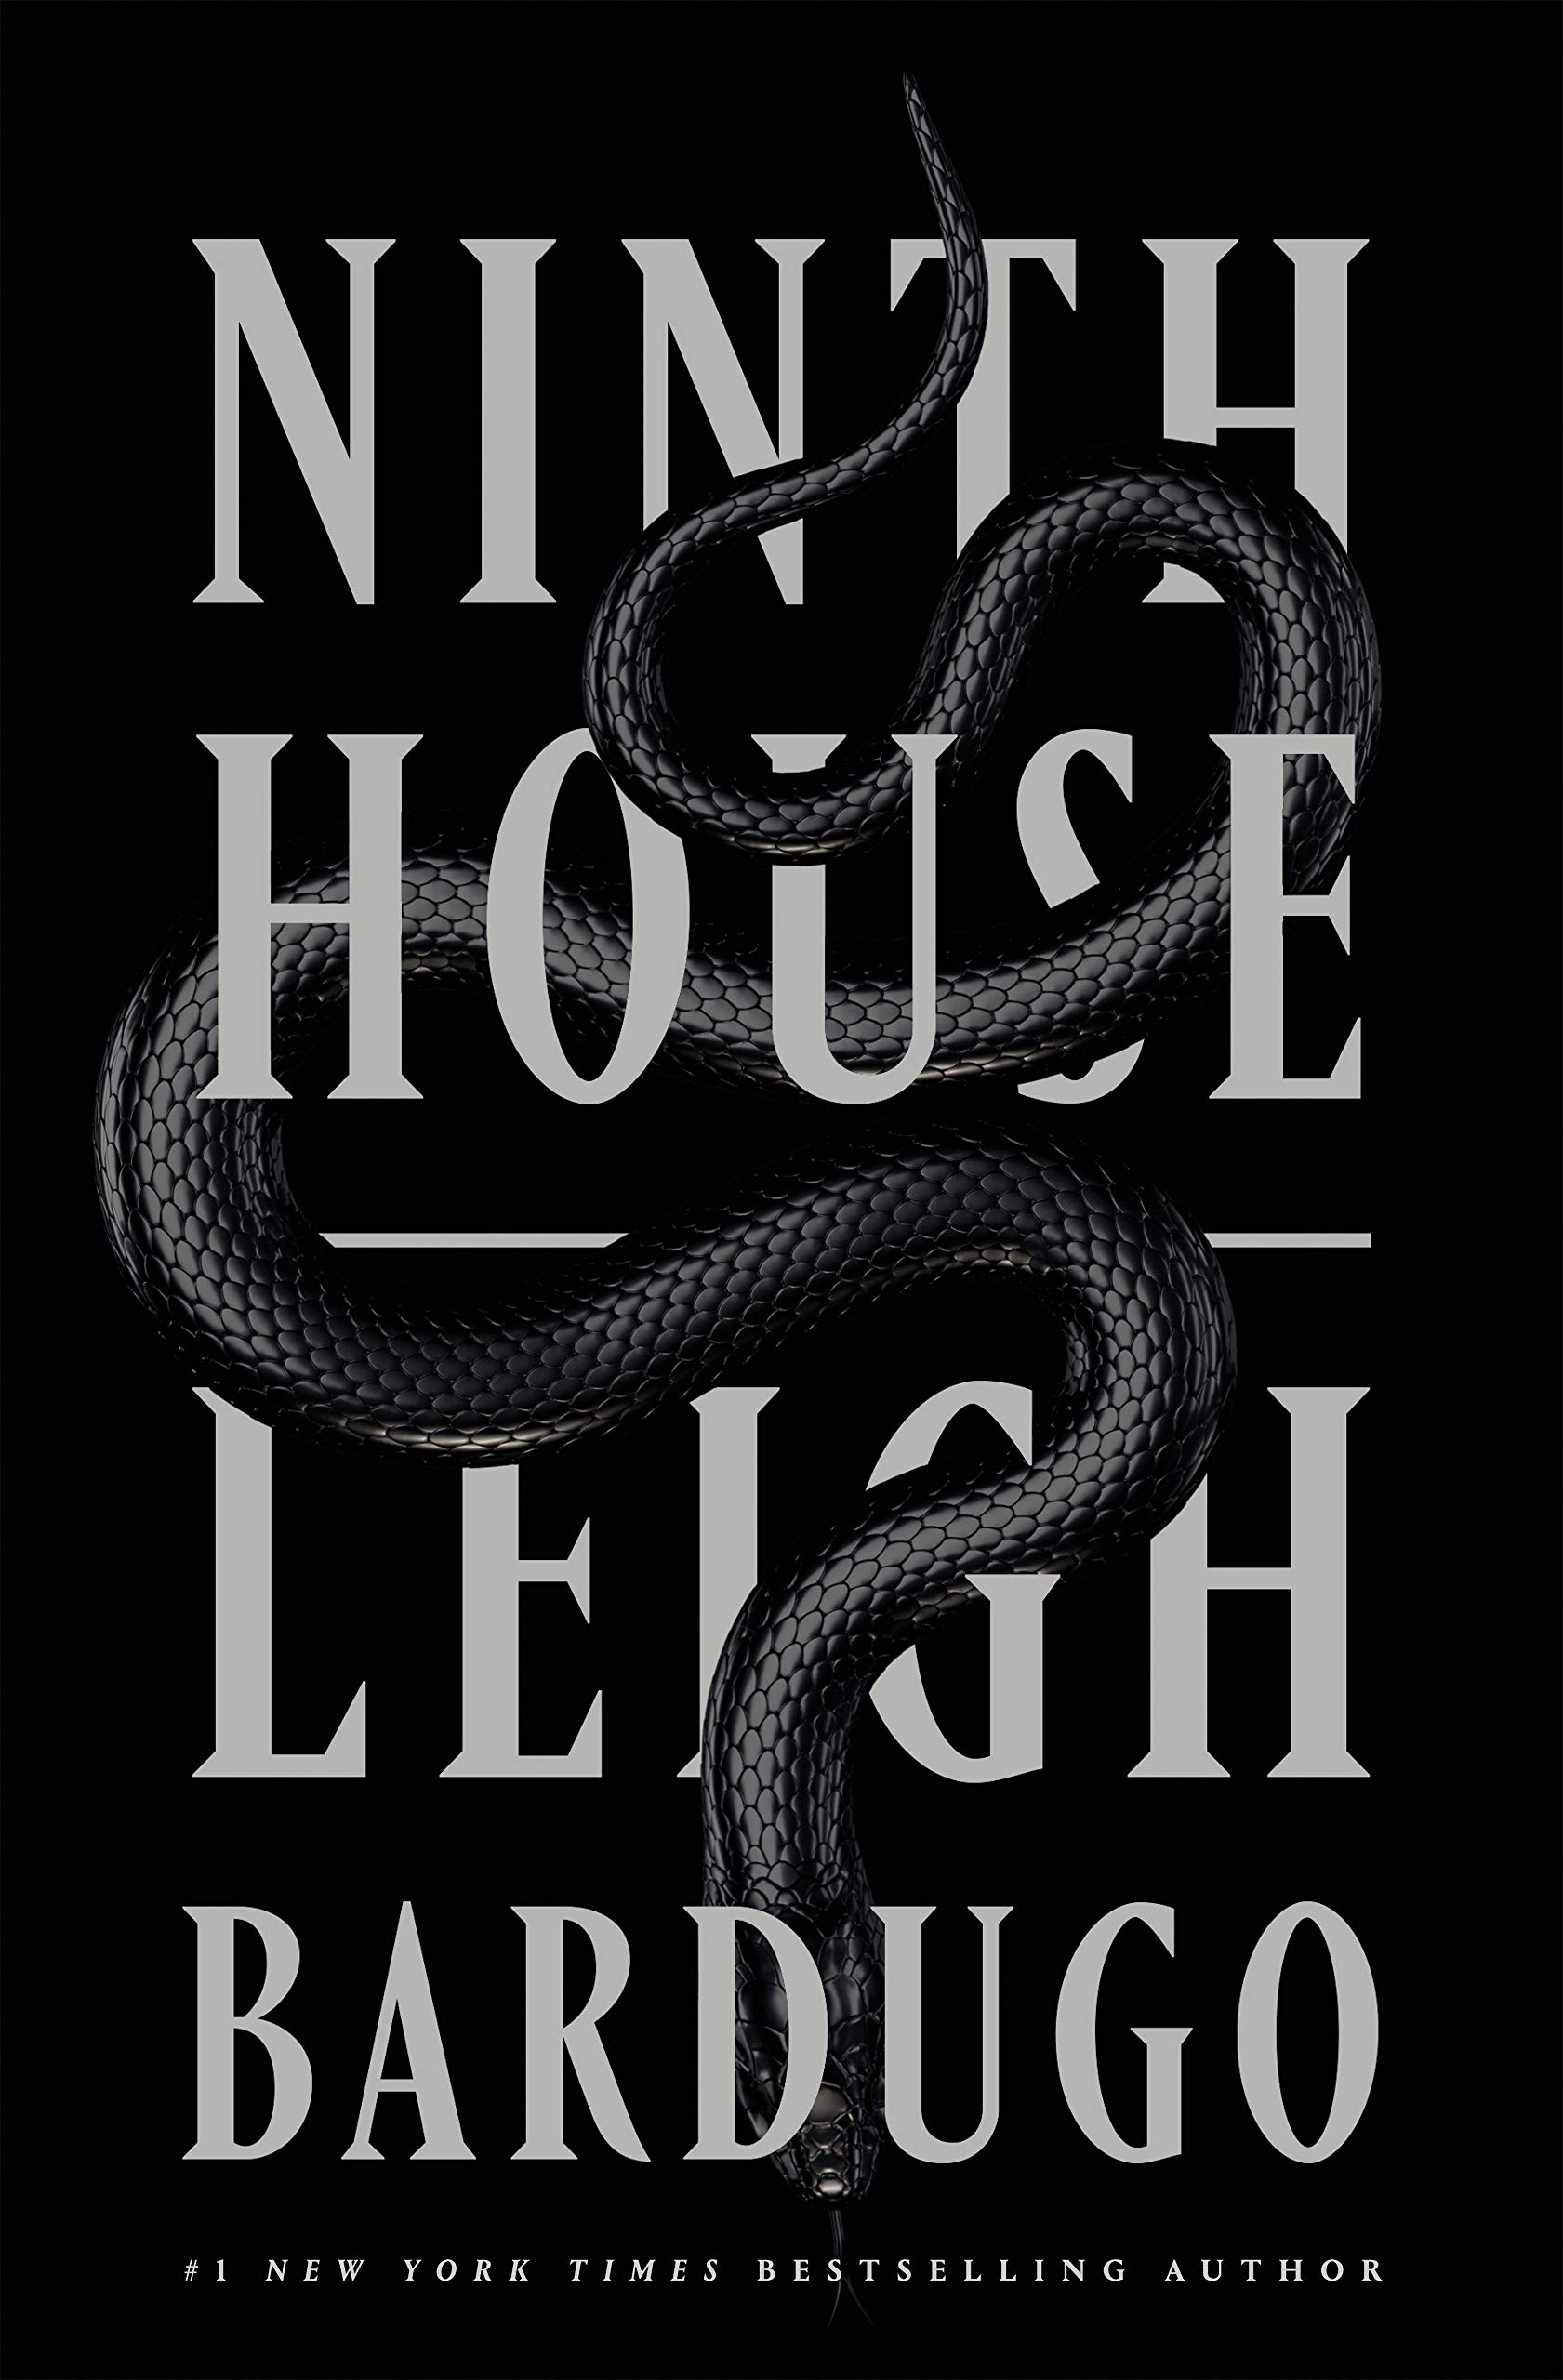 The cover of Ninth House by Leigh Bardugo